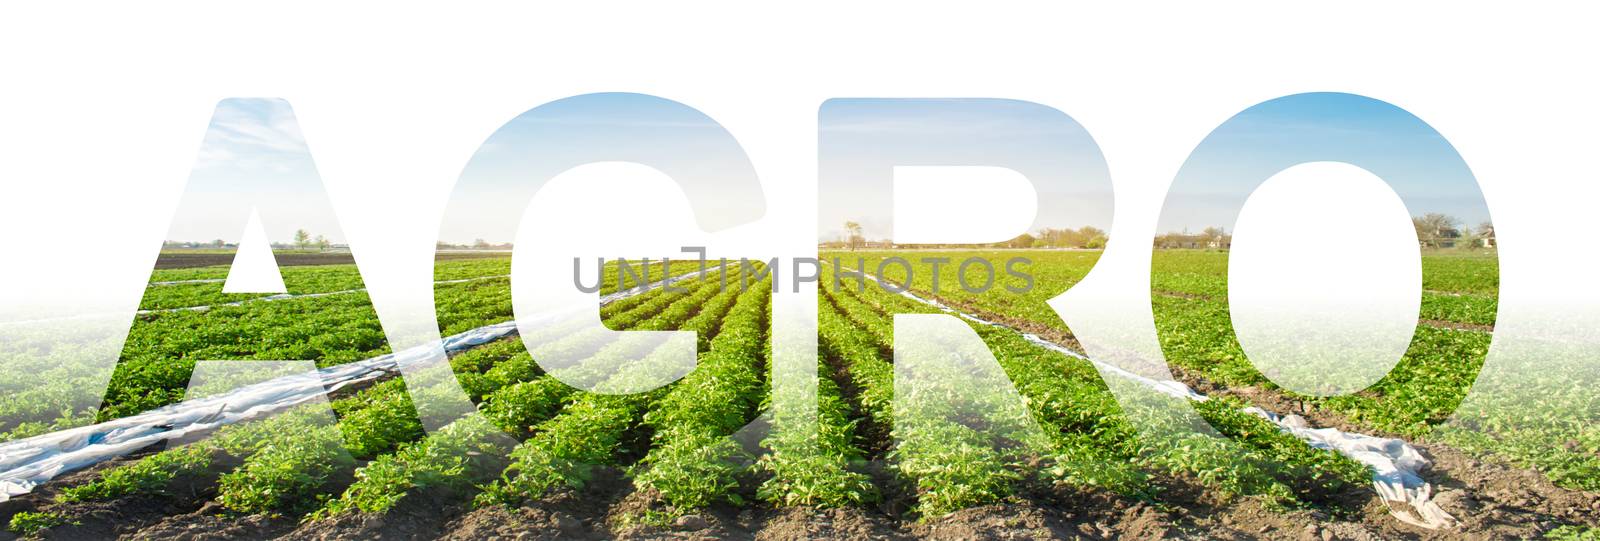 The inscription Agro on the background of a potato plantation field. Agribusiness and agro-industry. Agriculture. The use of innovative technologies, equipment and fertilizers. Beautiful landscape